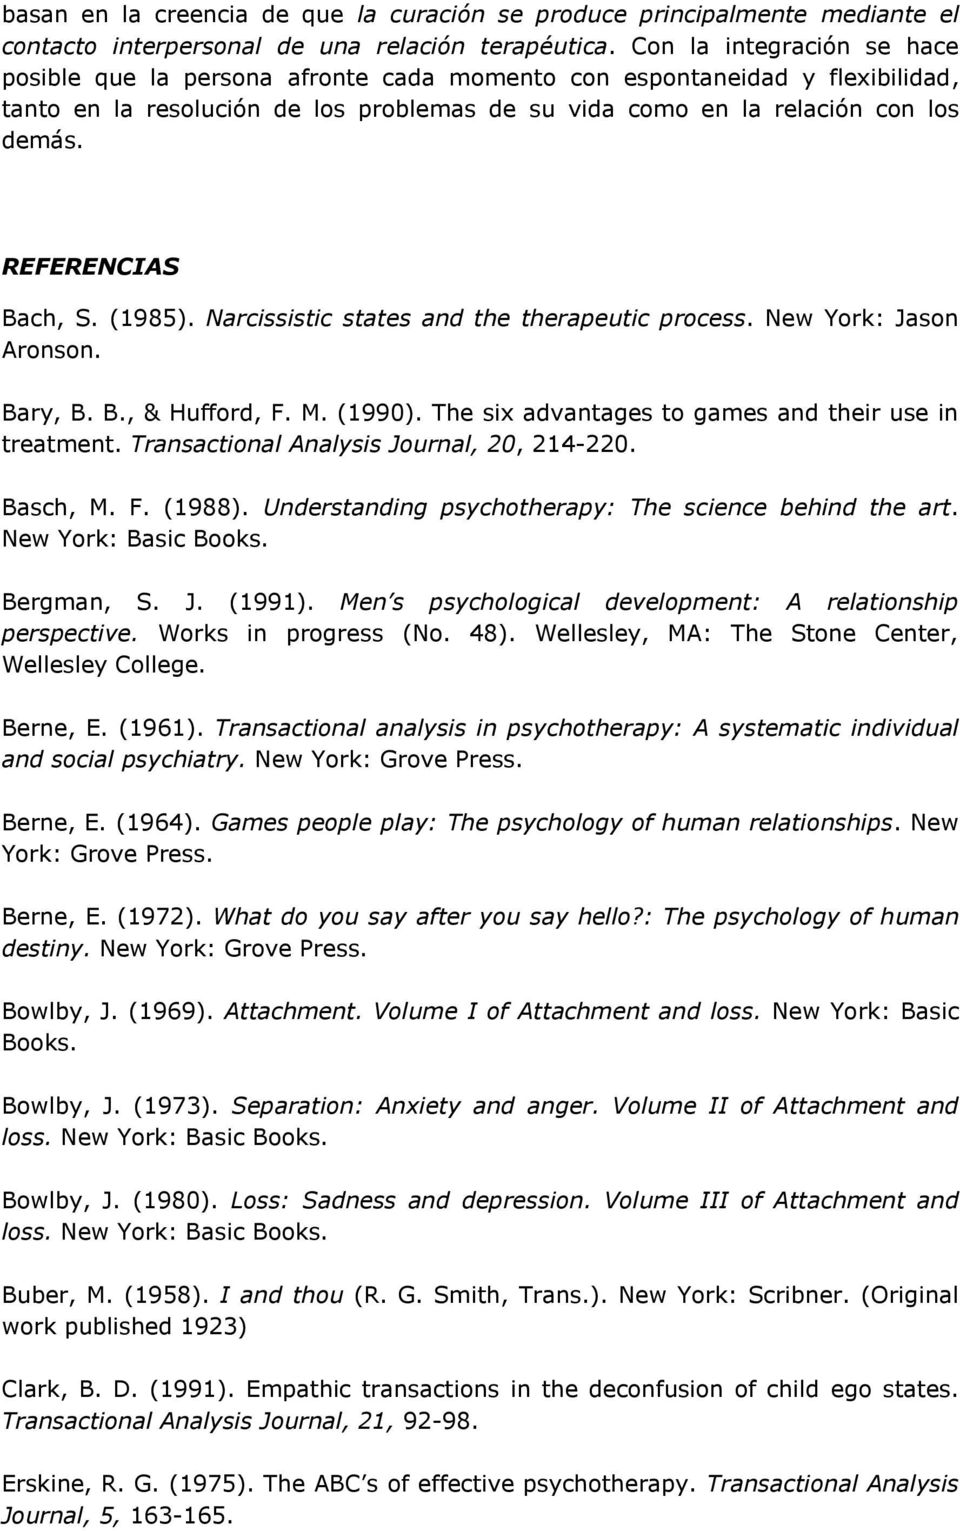 REFERENCIAS Bach, S. (1985). Narcissistic states and the therapeutic process. New York: Jason Aronson. Bary, B. B., & Hufford, F. M. (1990). The six advantages to games and their use in treatment.